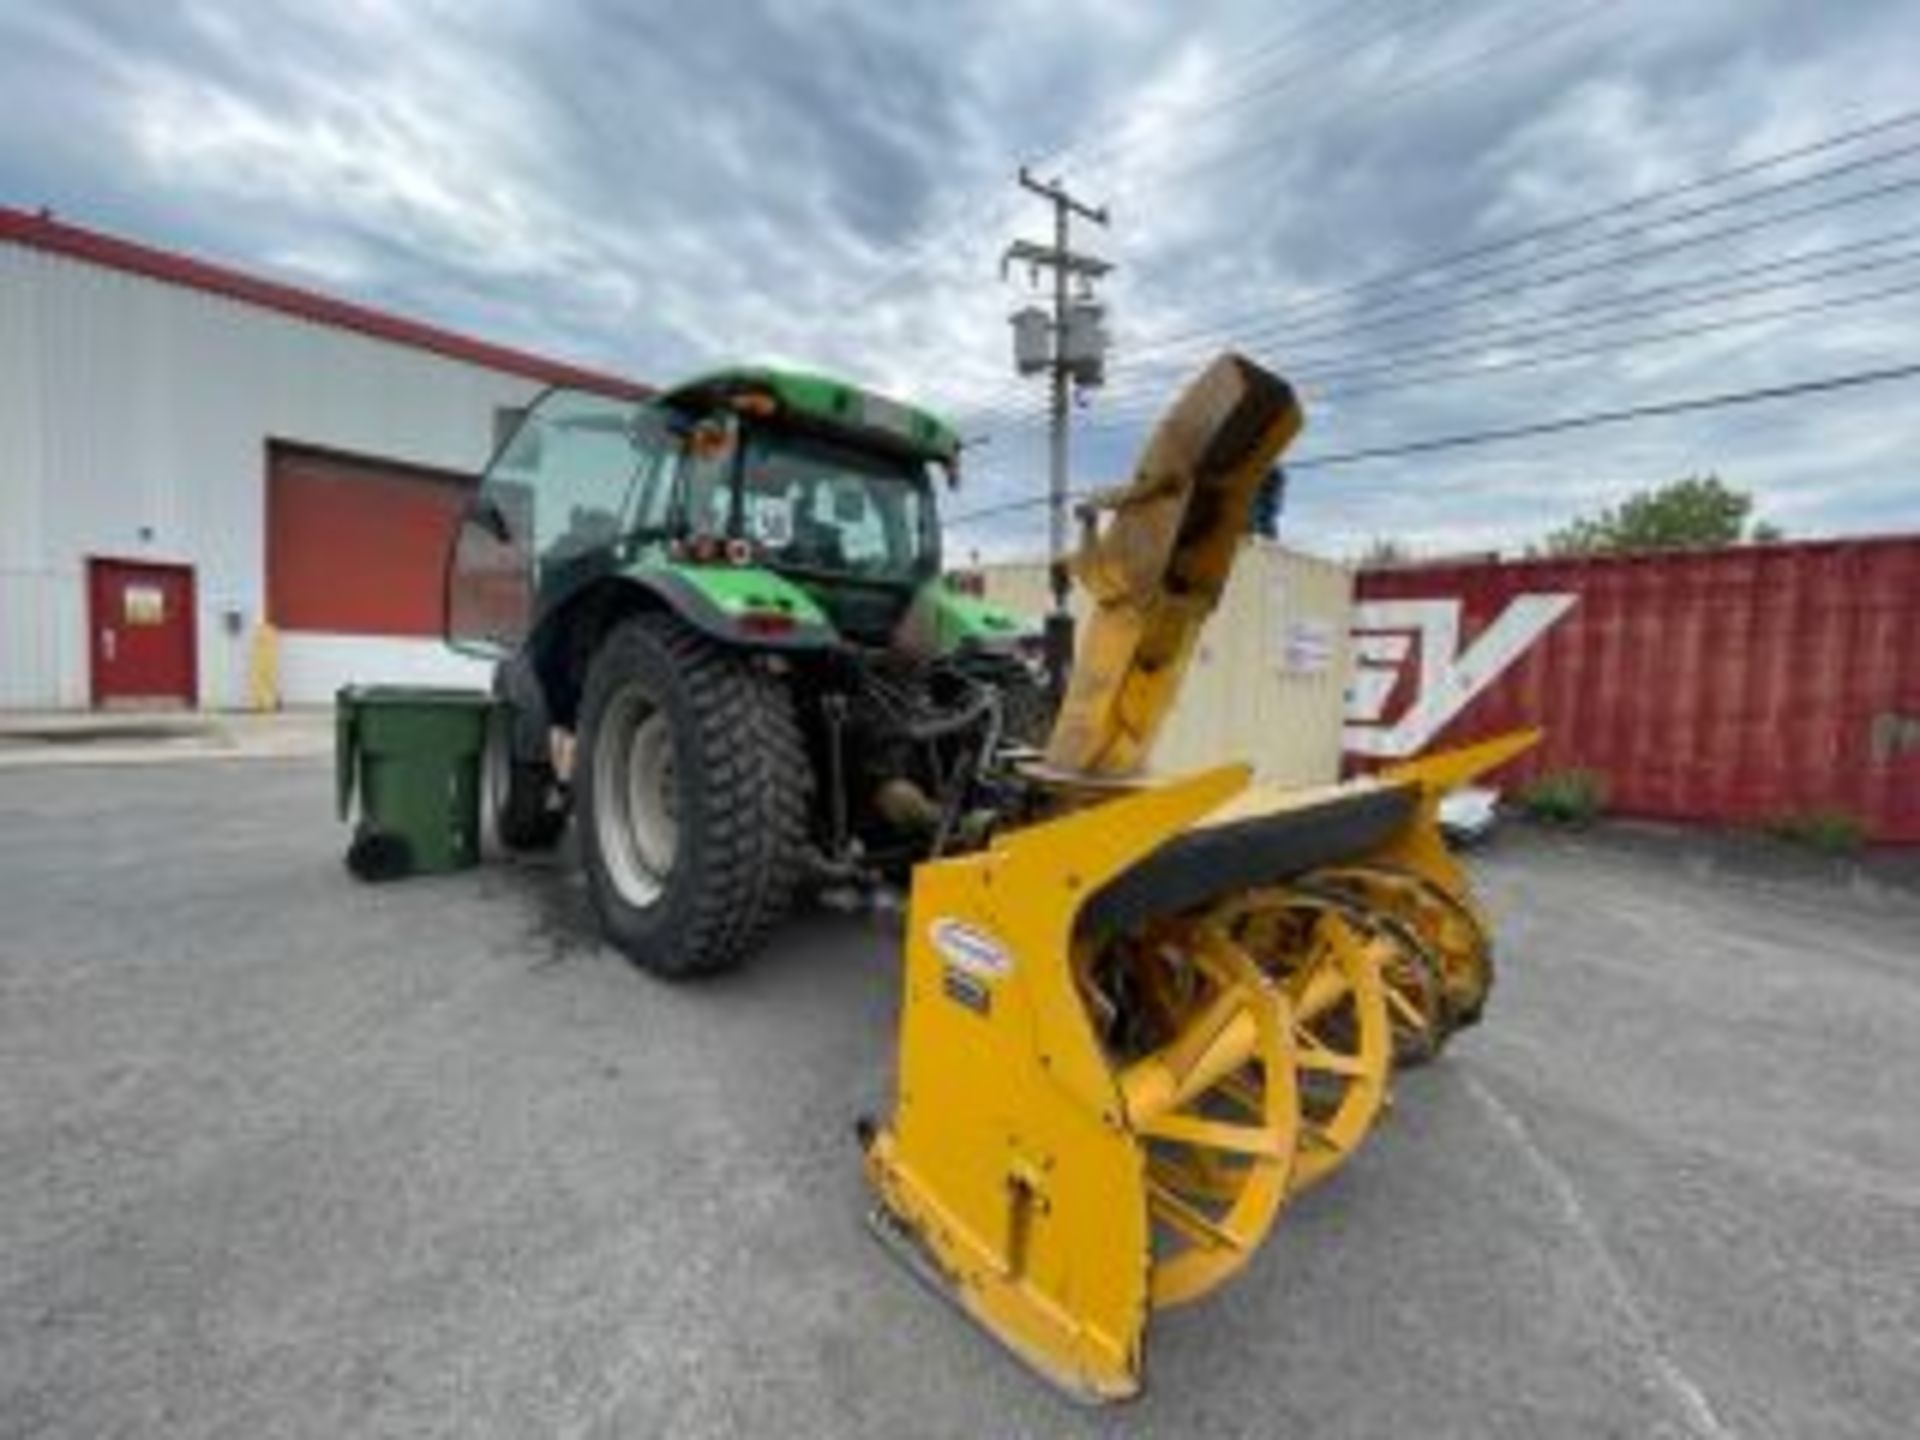 2018 DEUTZ-FAHR agricultural tractor # T51-10003 With PRONOVOST snow removal attachment 1109.8 Hours - Image 9 of 27